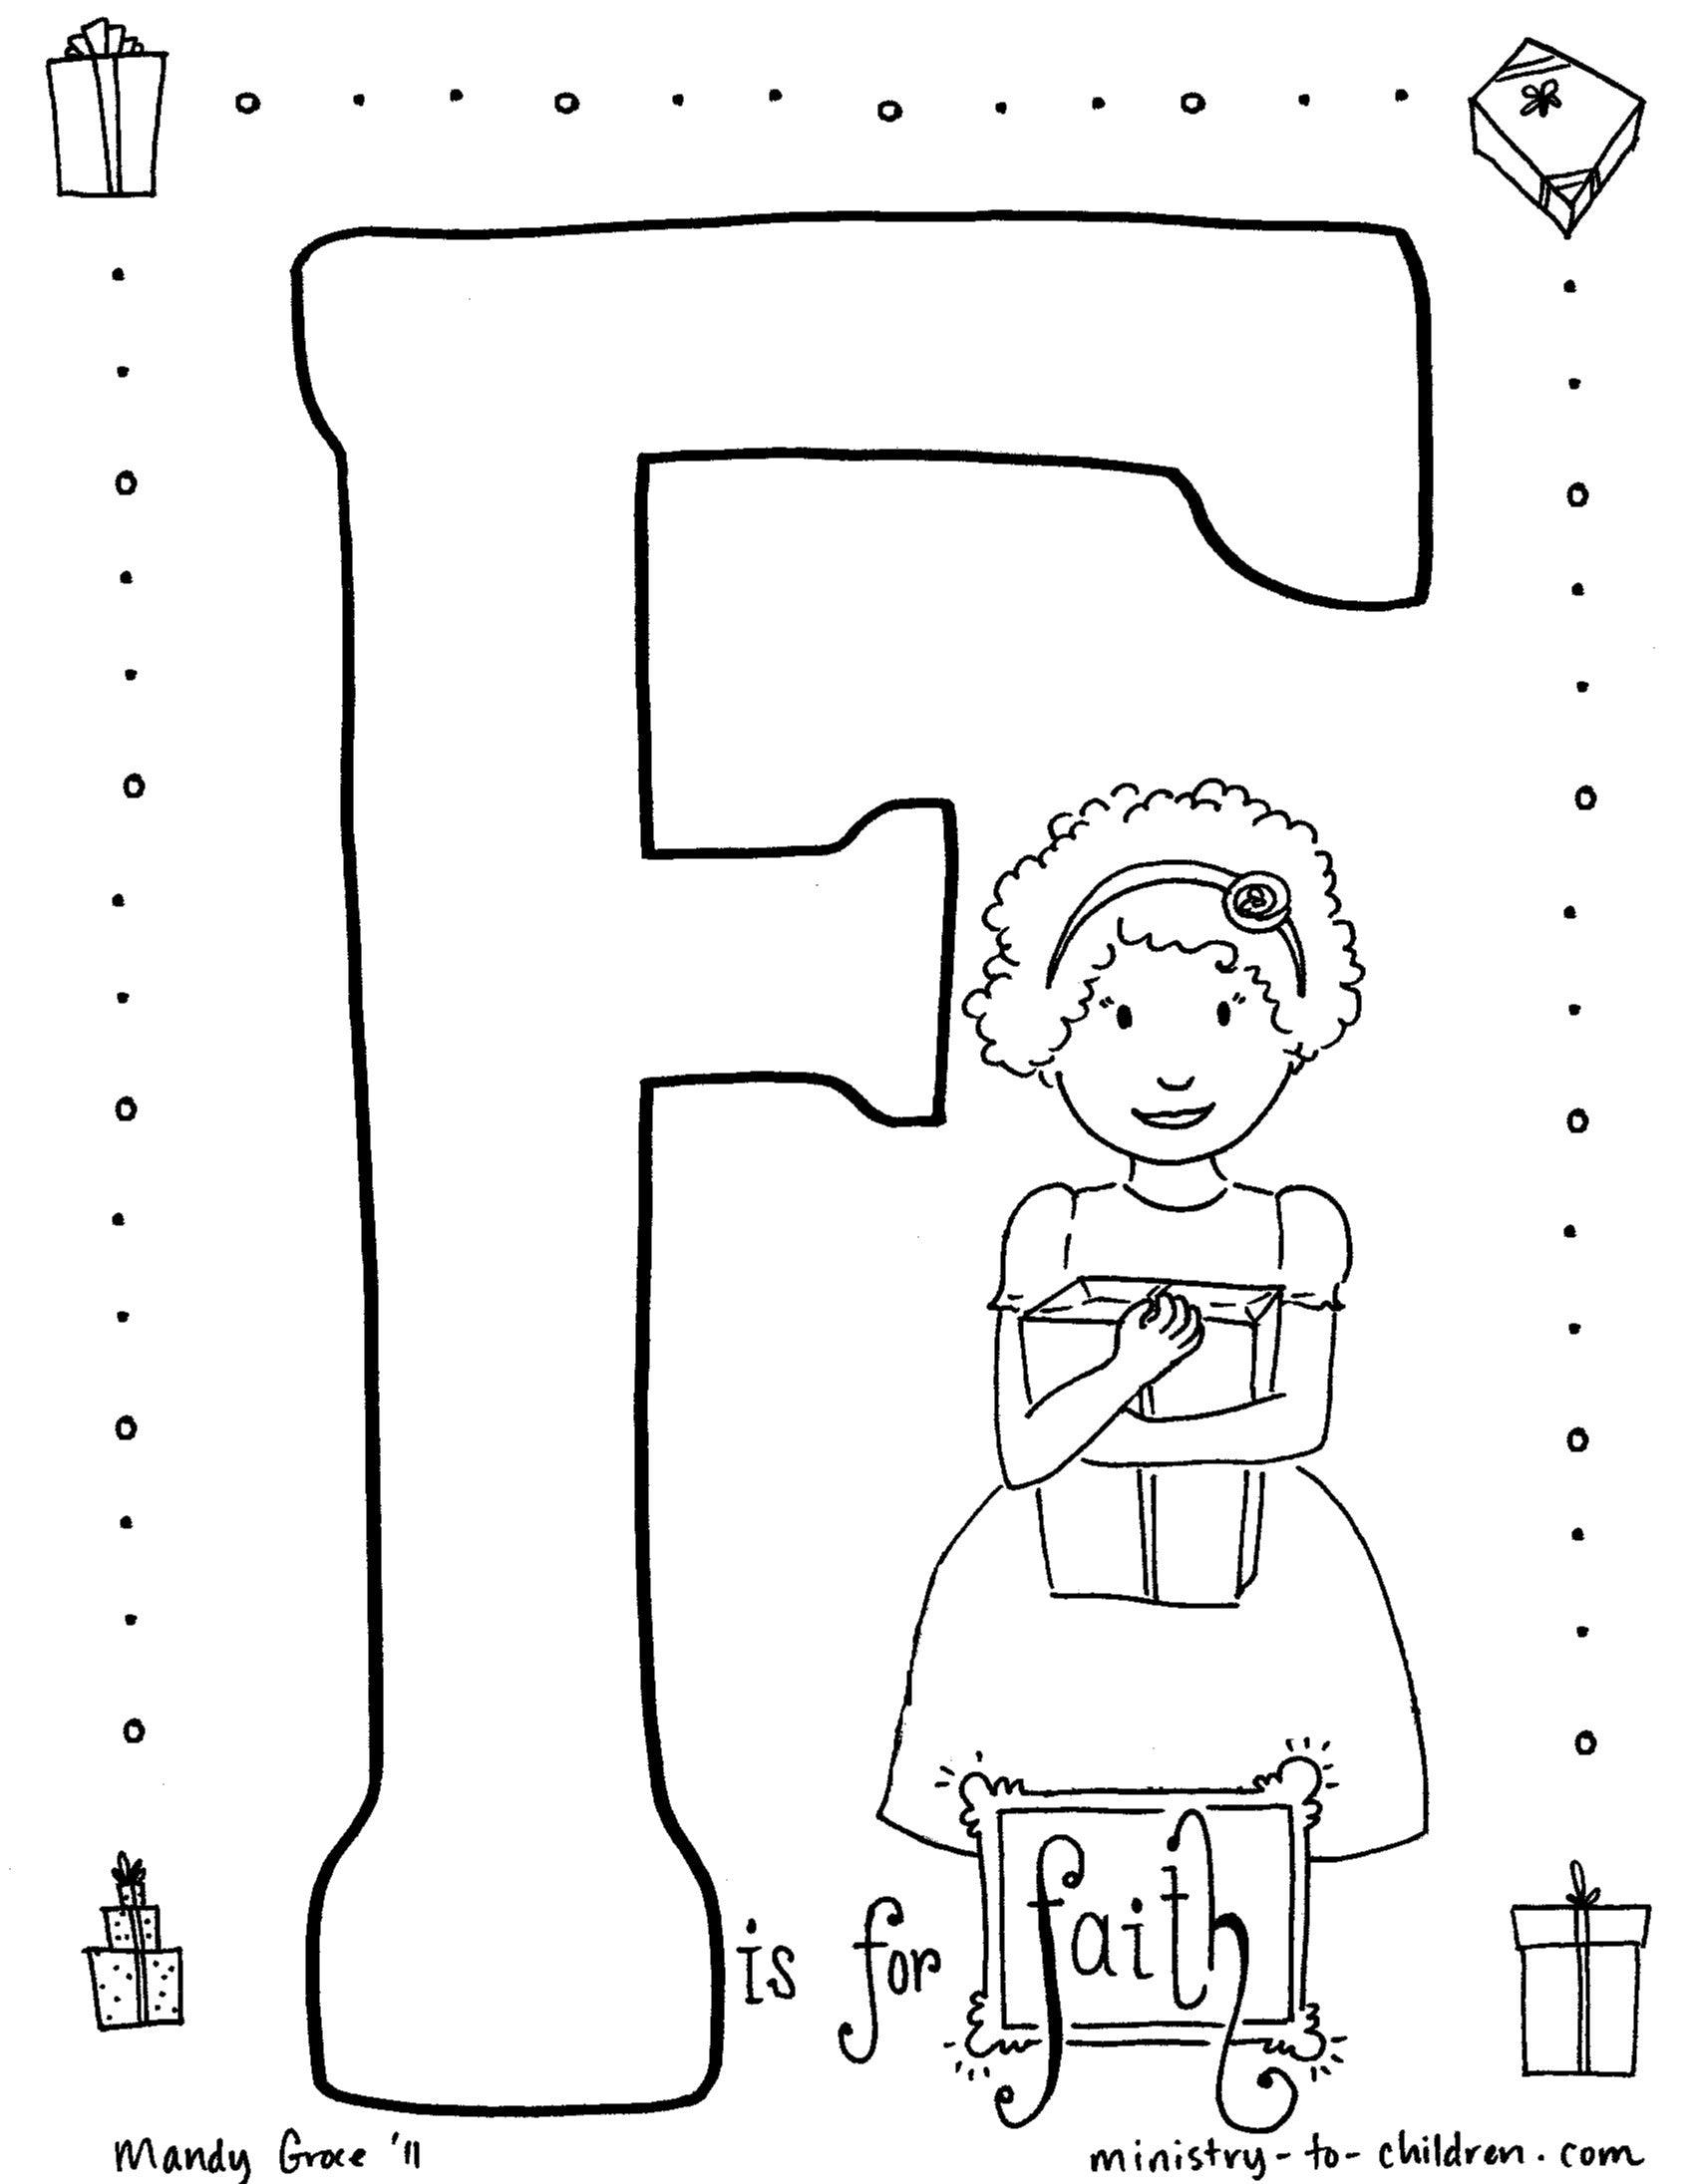 Bible Alphabet Coloring Pages (26 pages) download only - Sunday School Store 